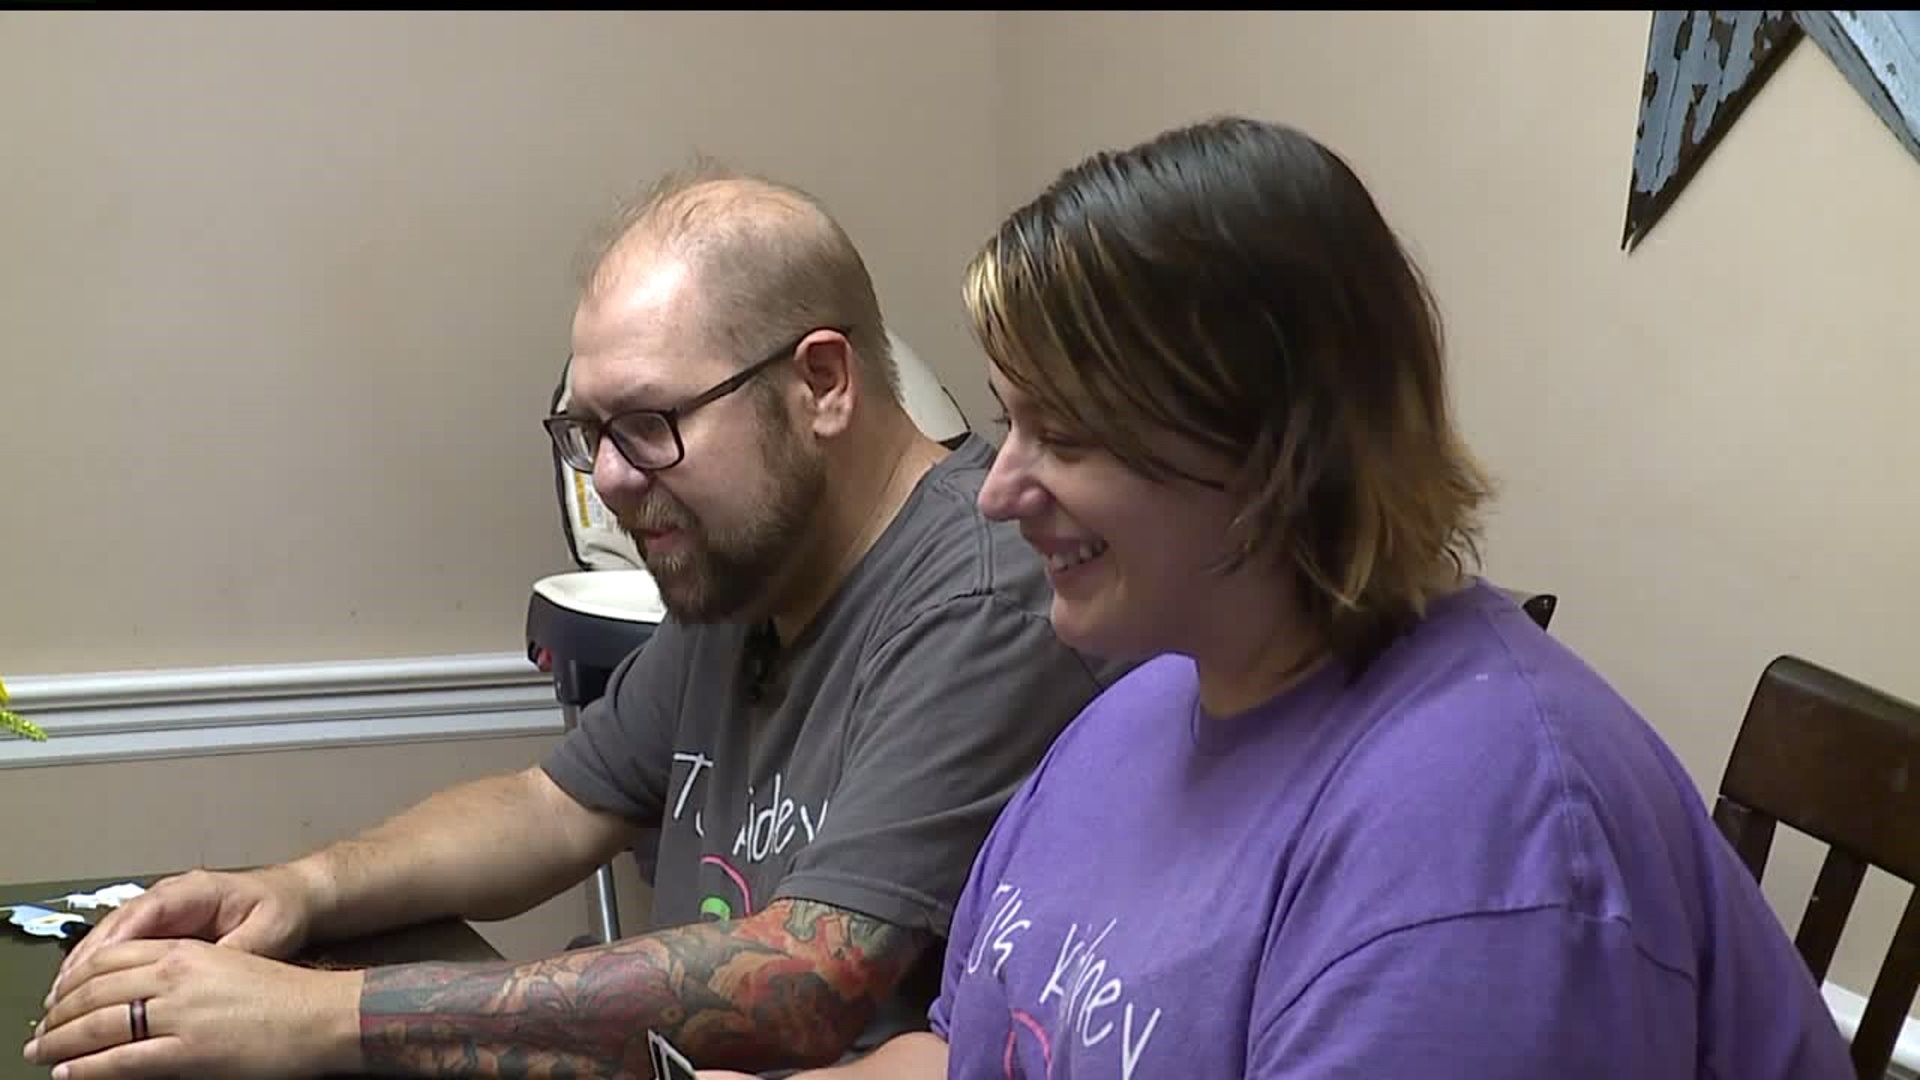 York Co. father in stage 5 kidney failure needs to find living donor